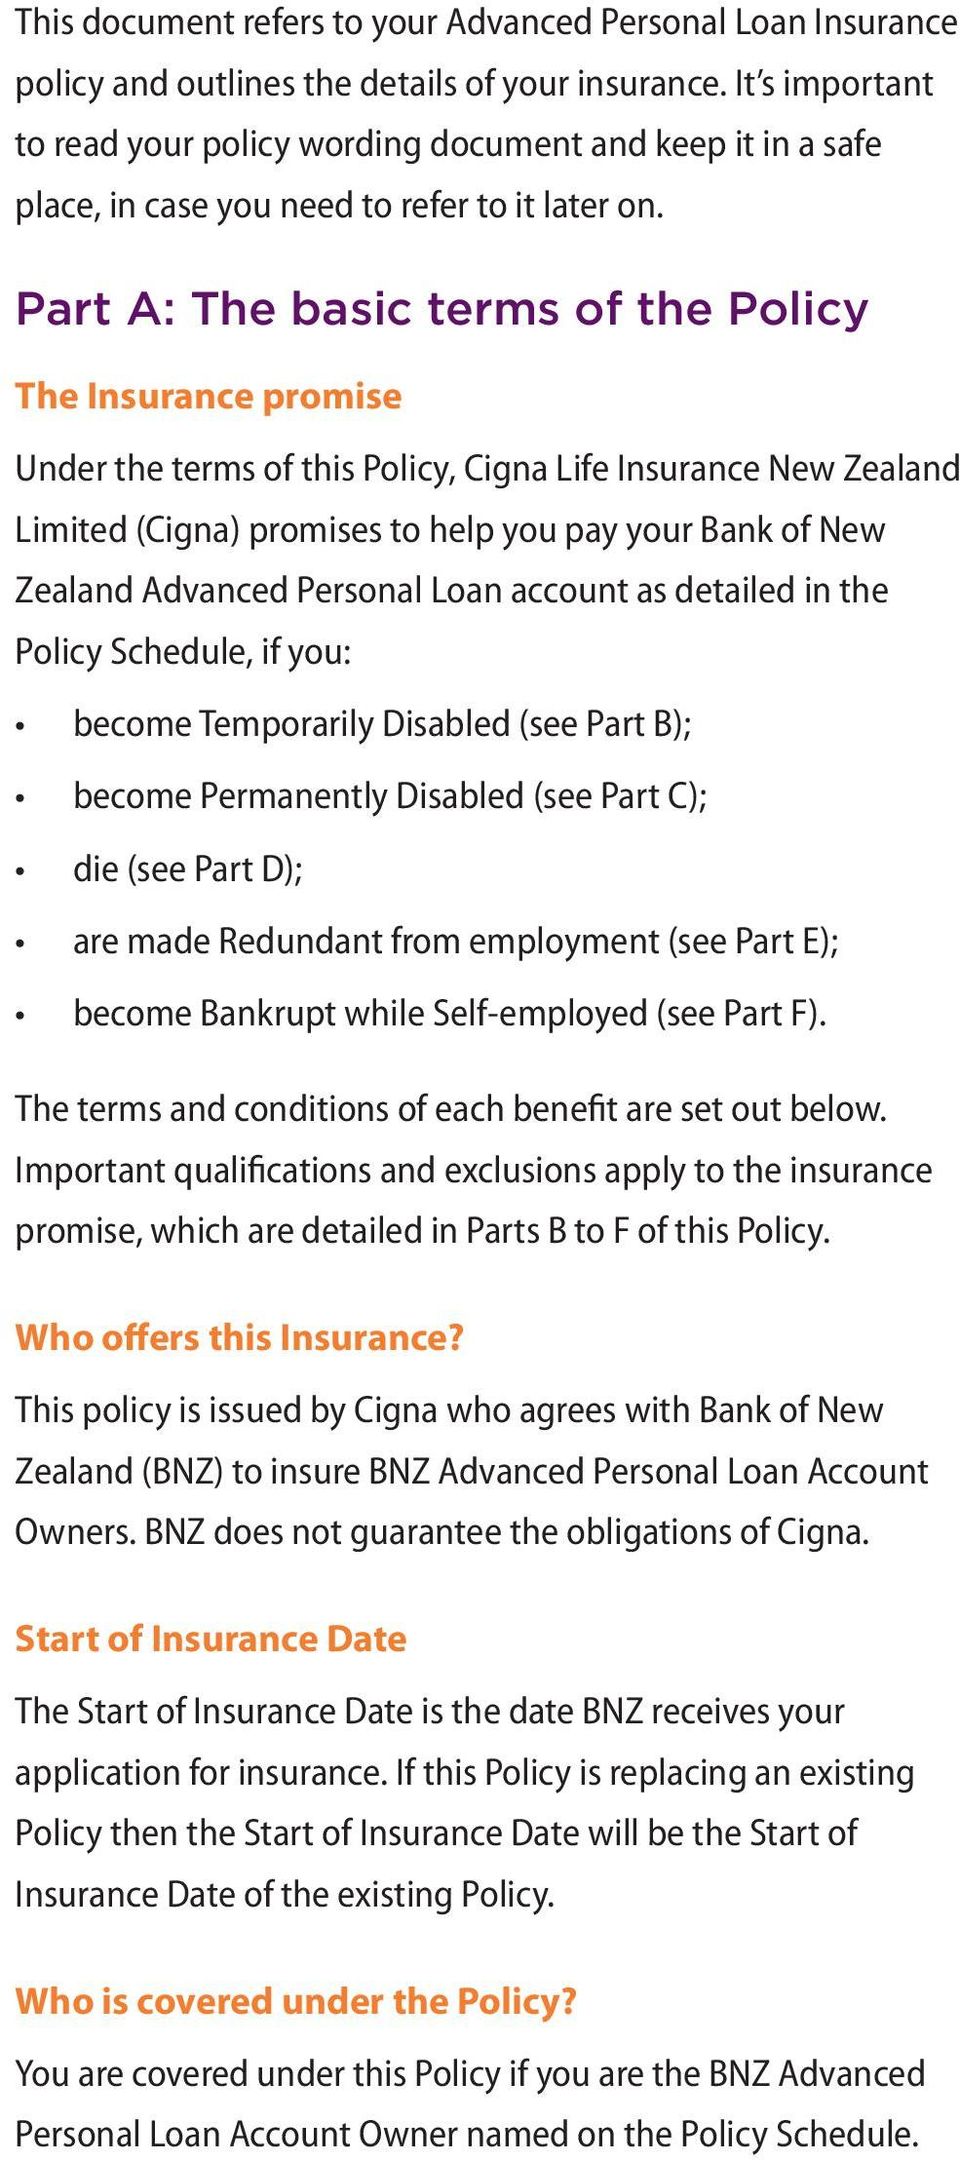 Part A: The basic terms of the Policy The Insurance promise Under the terms of this Policy, Cigna Life Insurance New Zealand Limited (Cigna) promises to help you pay your Bank of New Zealand Advanced